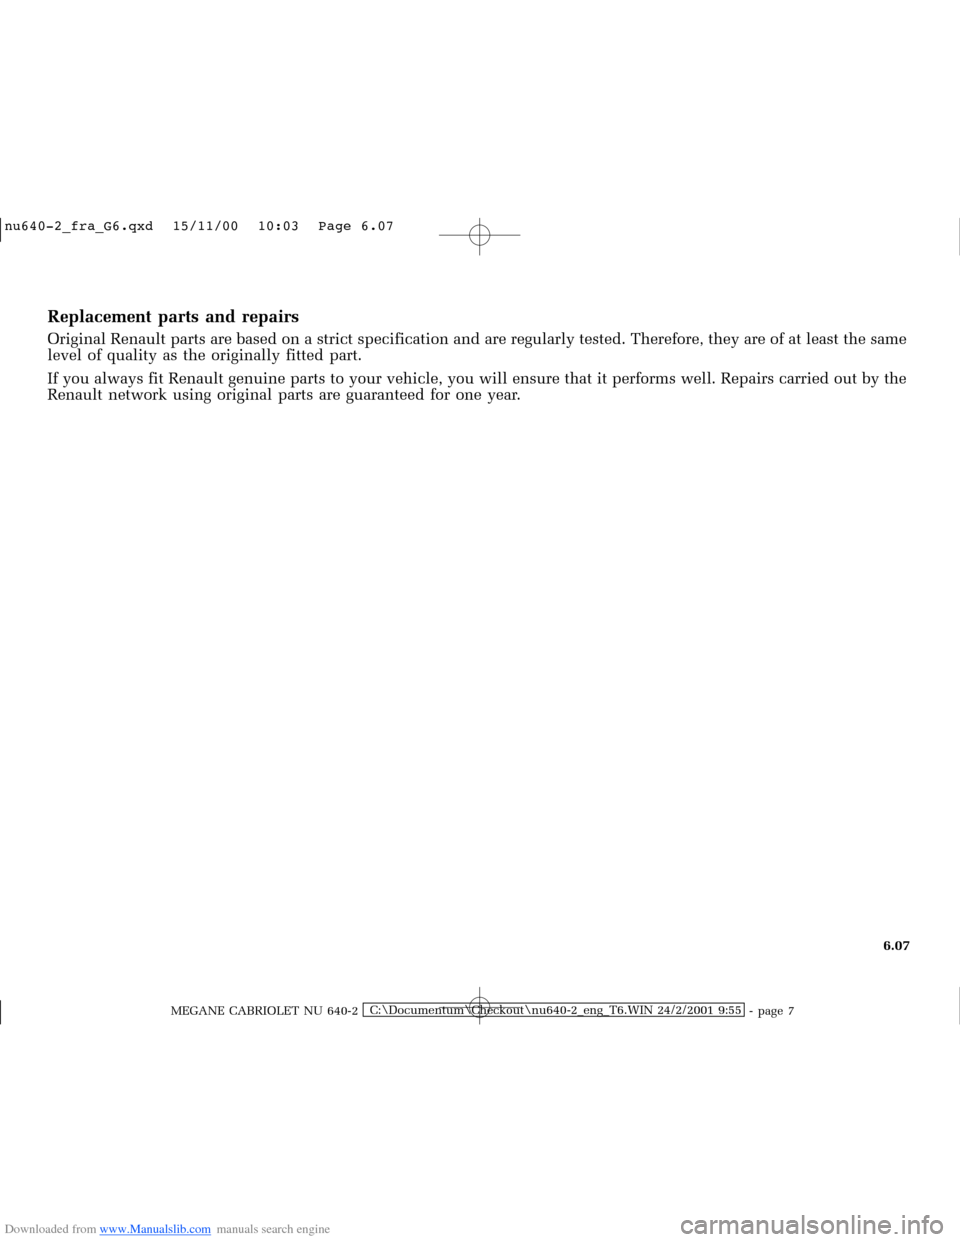 RENAULT MEGANE 2000 X64 / 1.G Owners Manual Downloaded from www.Manualslib.com manuals search engine �Q�X������B�I�U�D�B�*���T�[�G� � ��������� � ������ � �3�D�J�H� ����
MEGANE CABRIOLET NU 640-2C:\Documentum\Chec